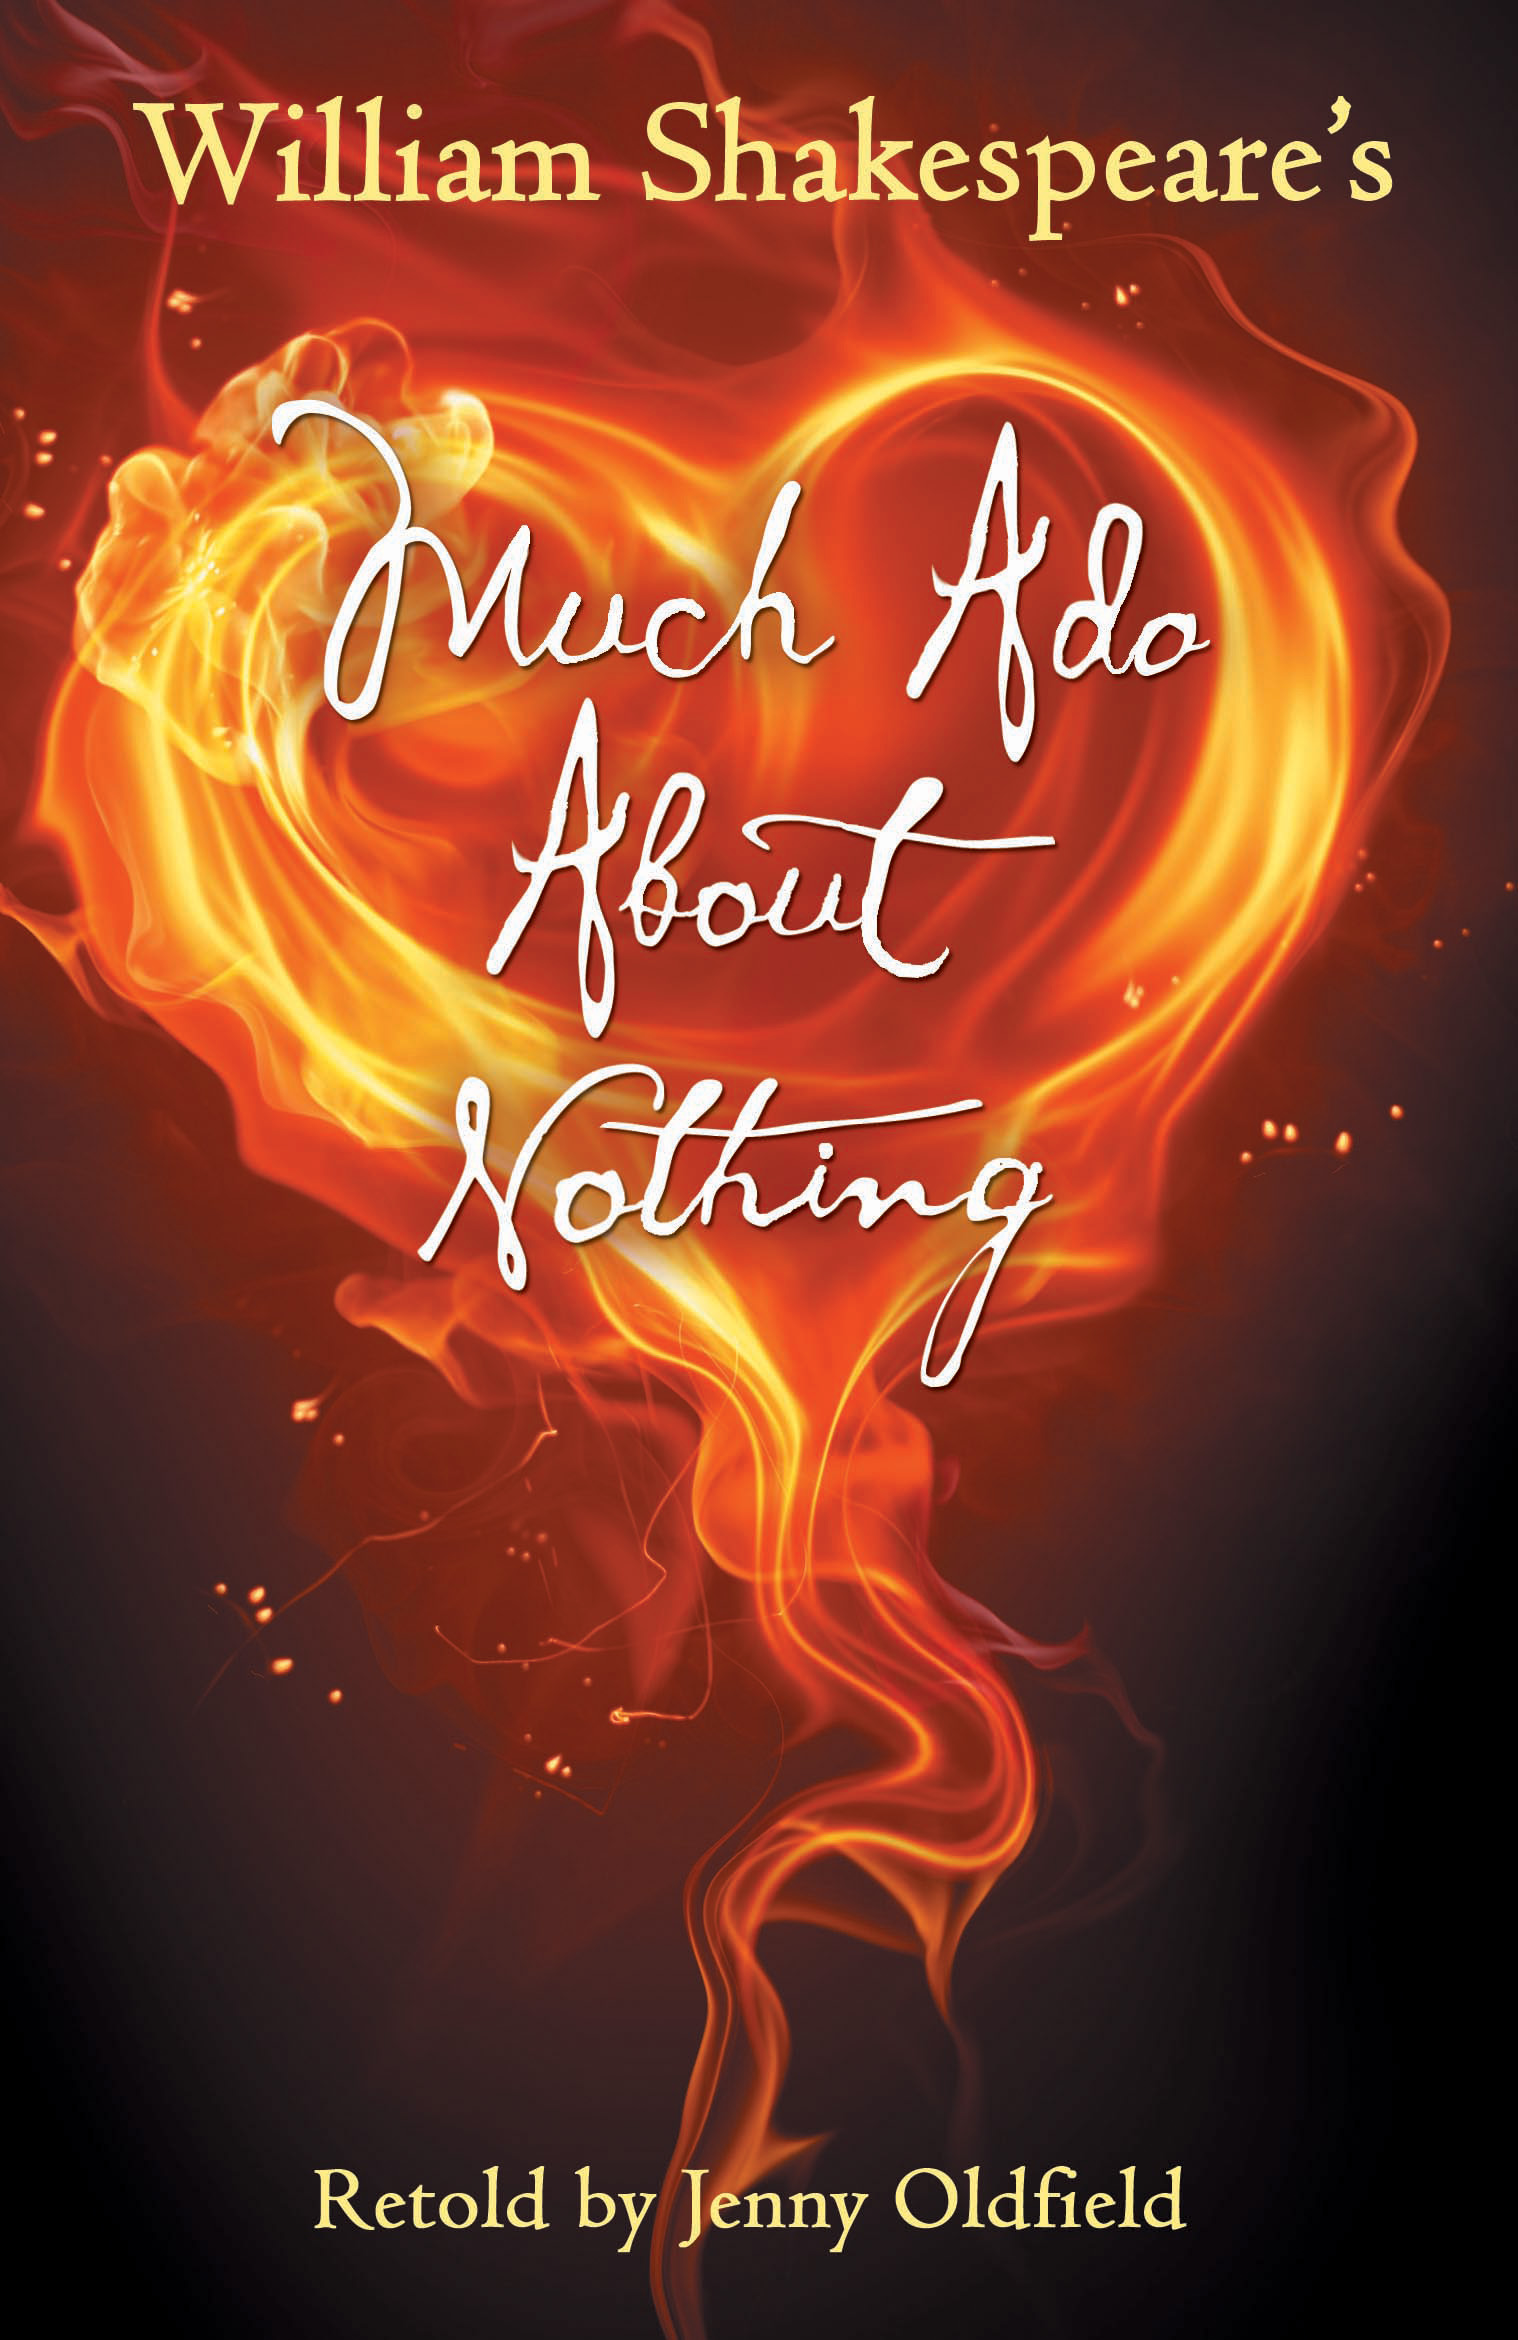 Much Ado About Nothing (2011) by Jenny Oldfield